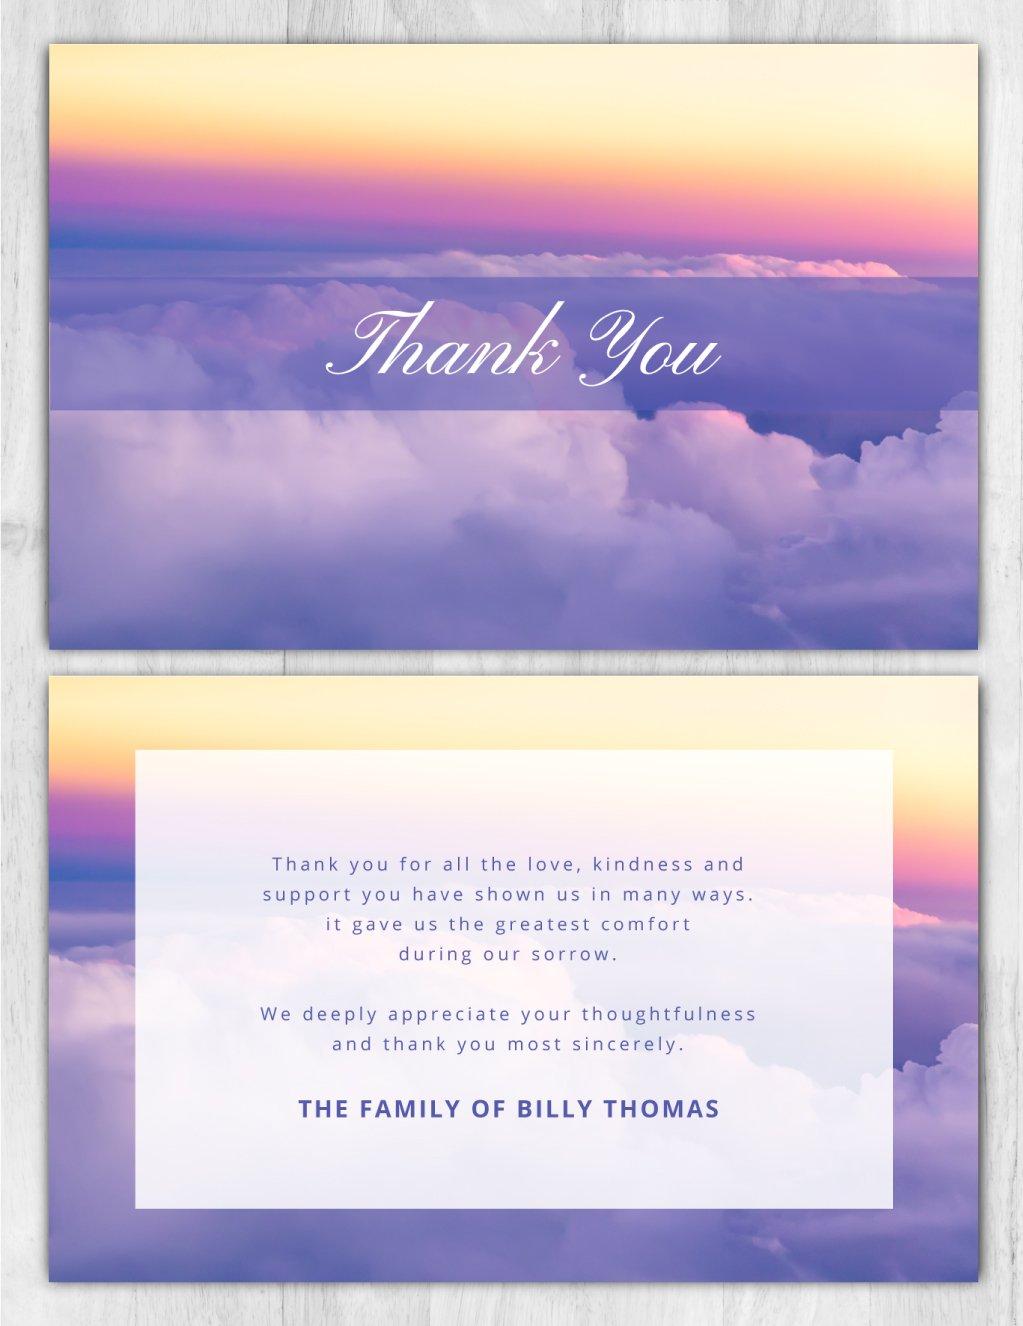 Thank You Card 2012